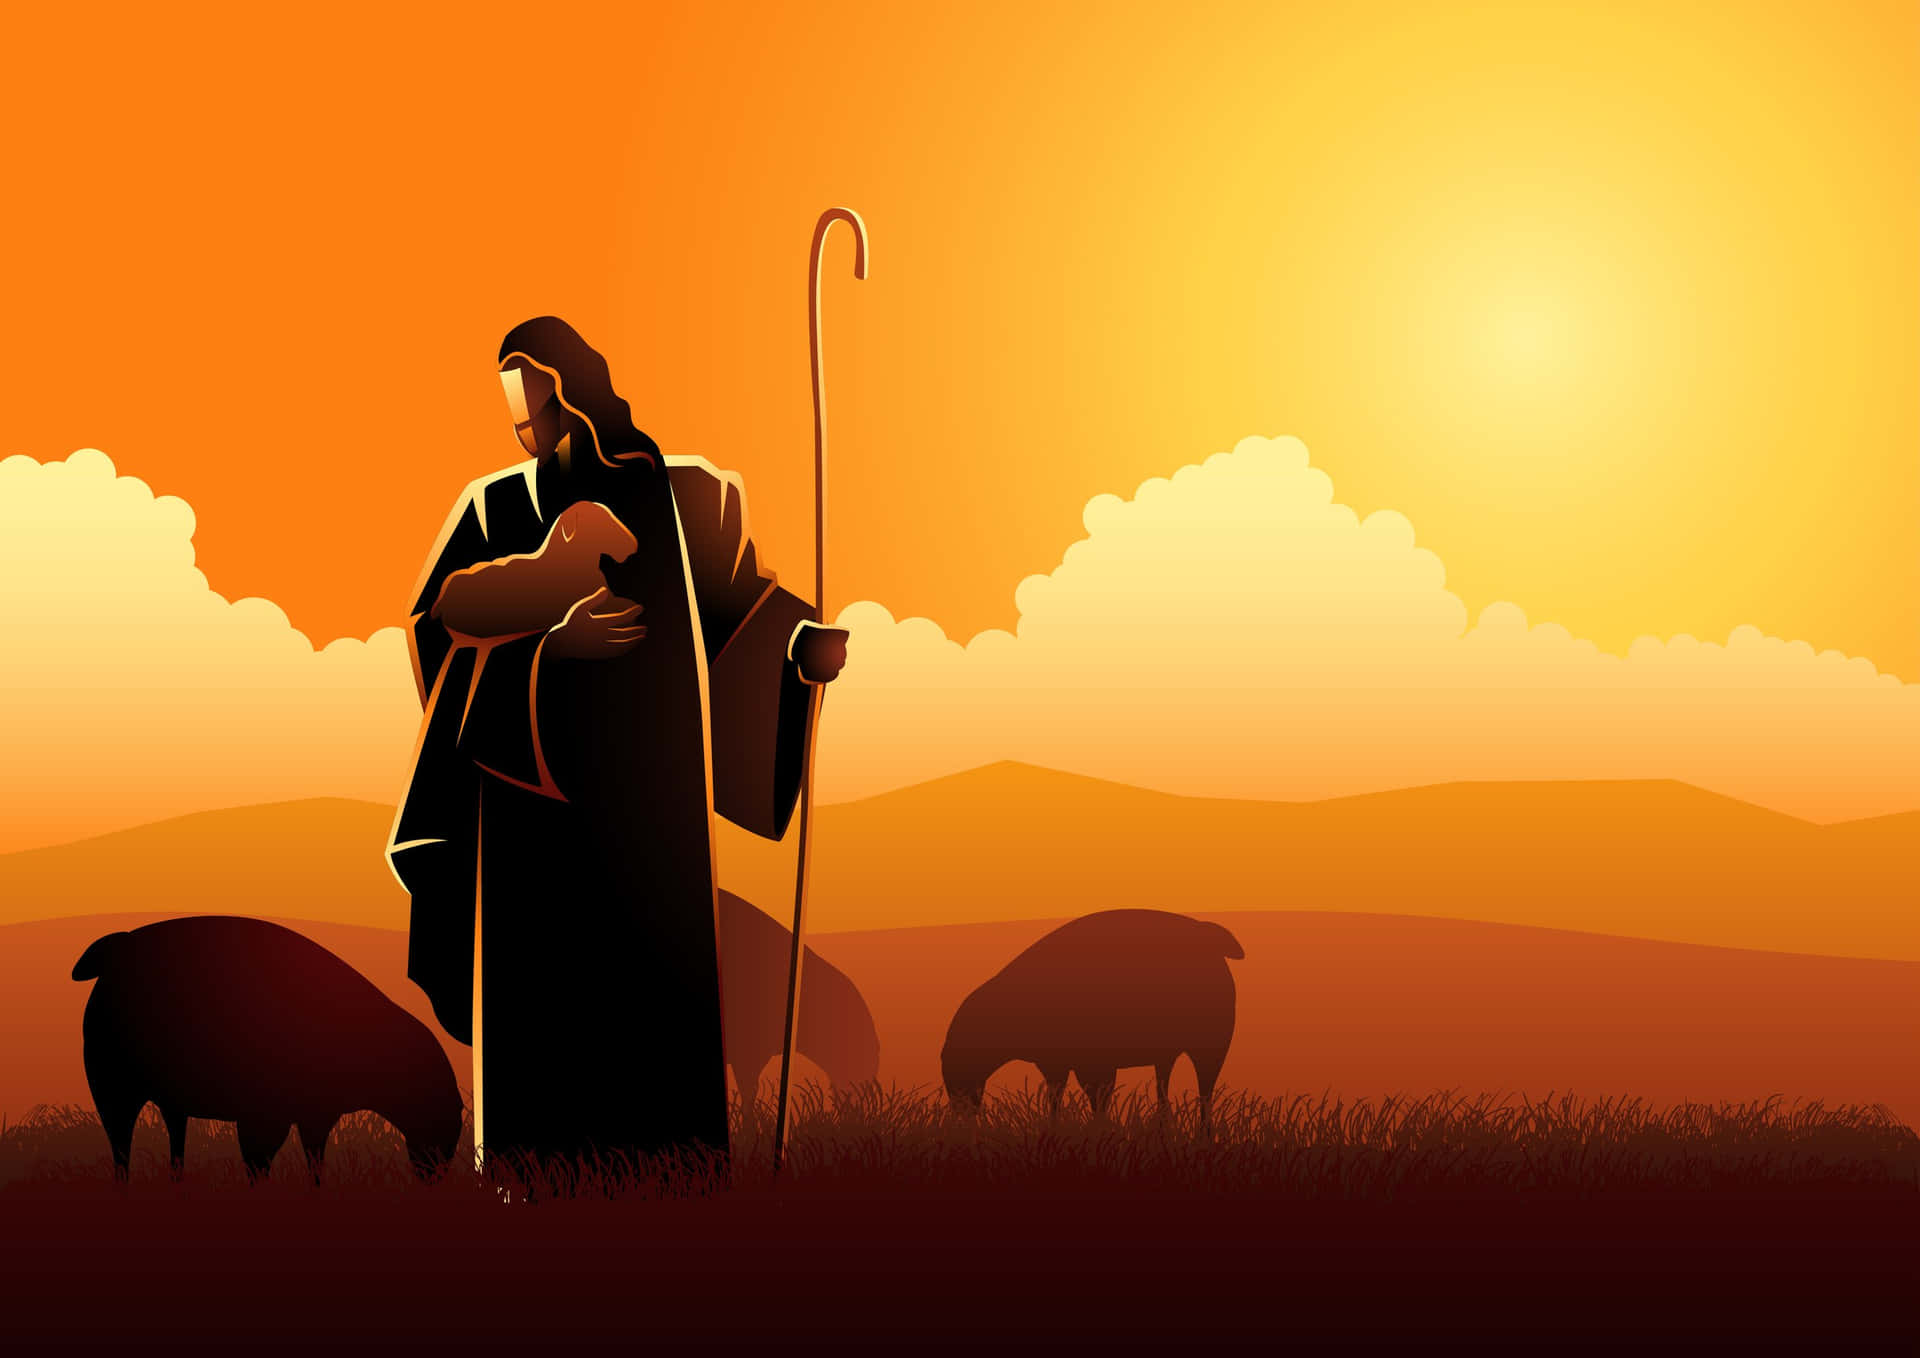 [100+] Jesus With Sheep Wallpapers | Wallpapers.com